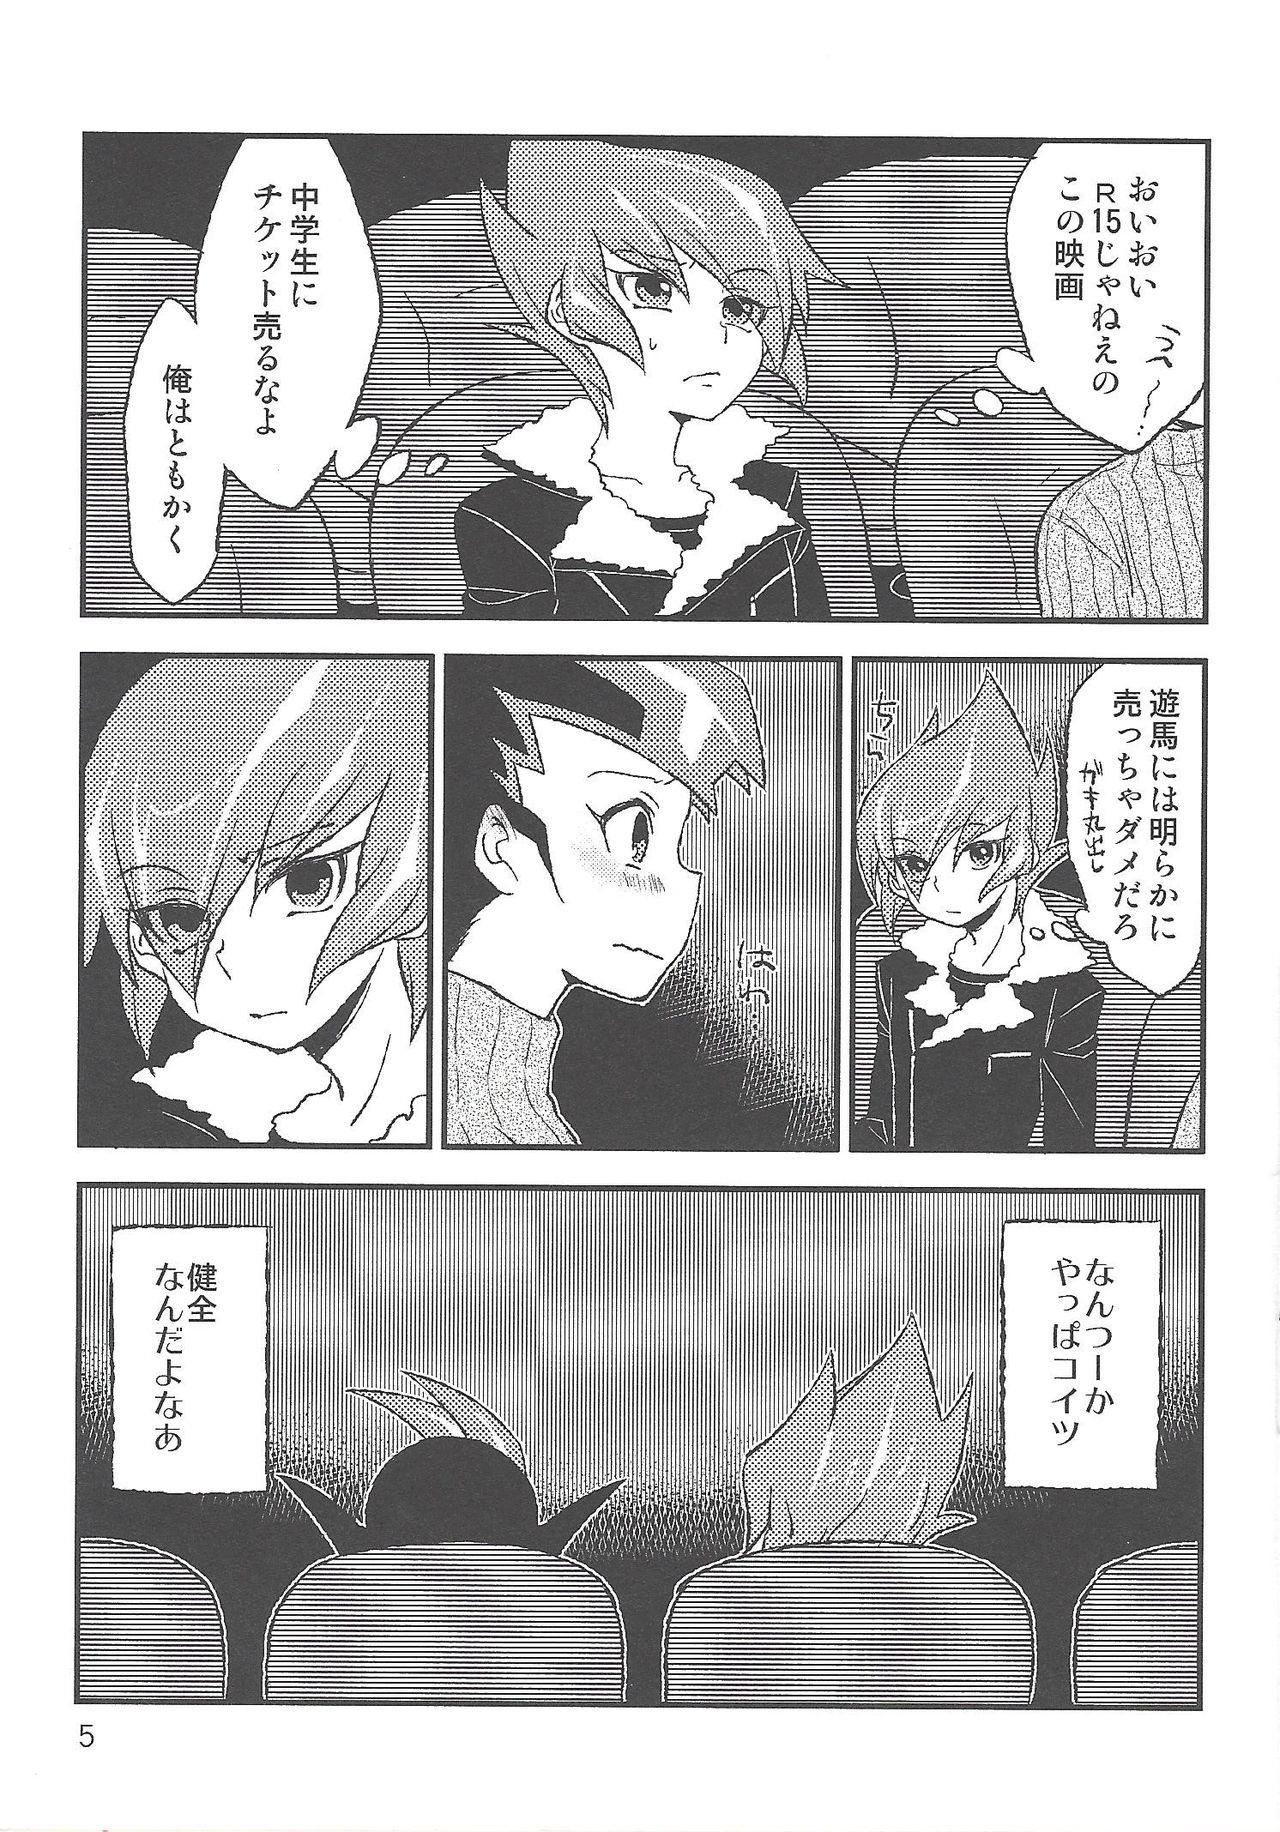 Freckles INSTANT ROOM - Yu gi oh zexal Gay Averagedick - Page 6